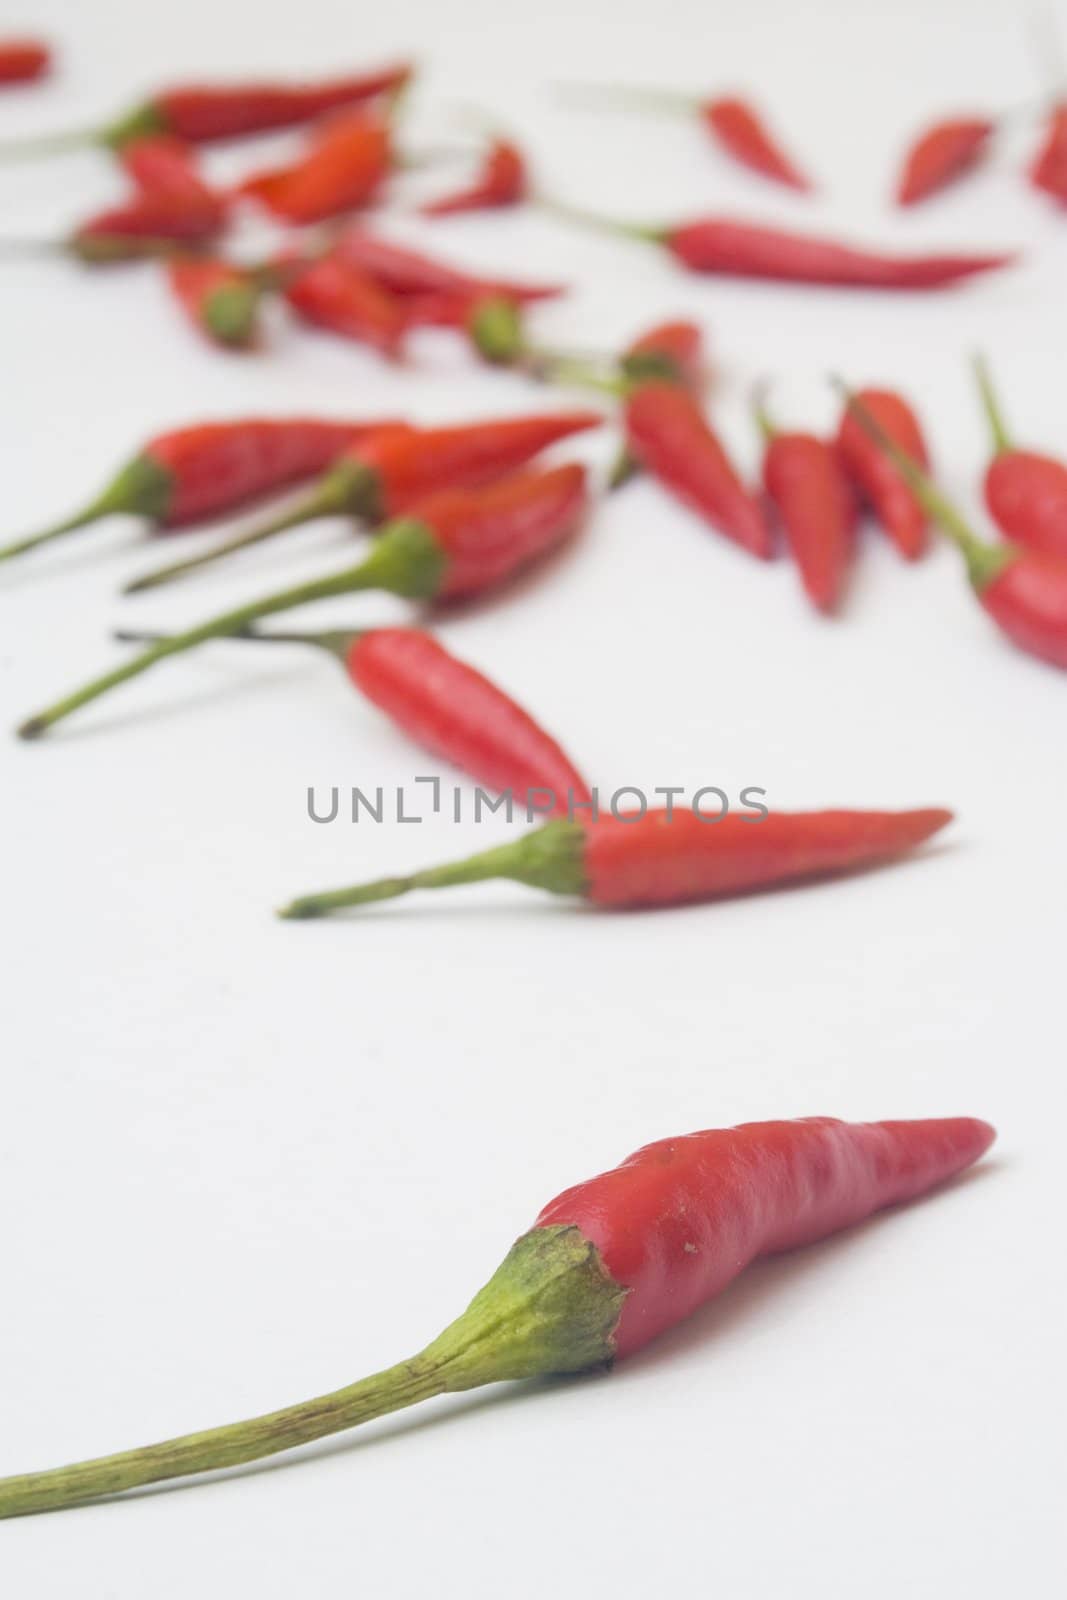 An arrangement of small red chili peppers isolated against a white background